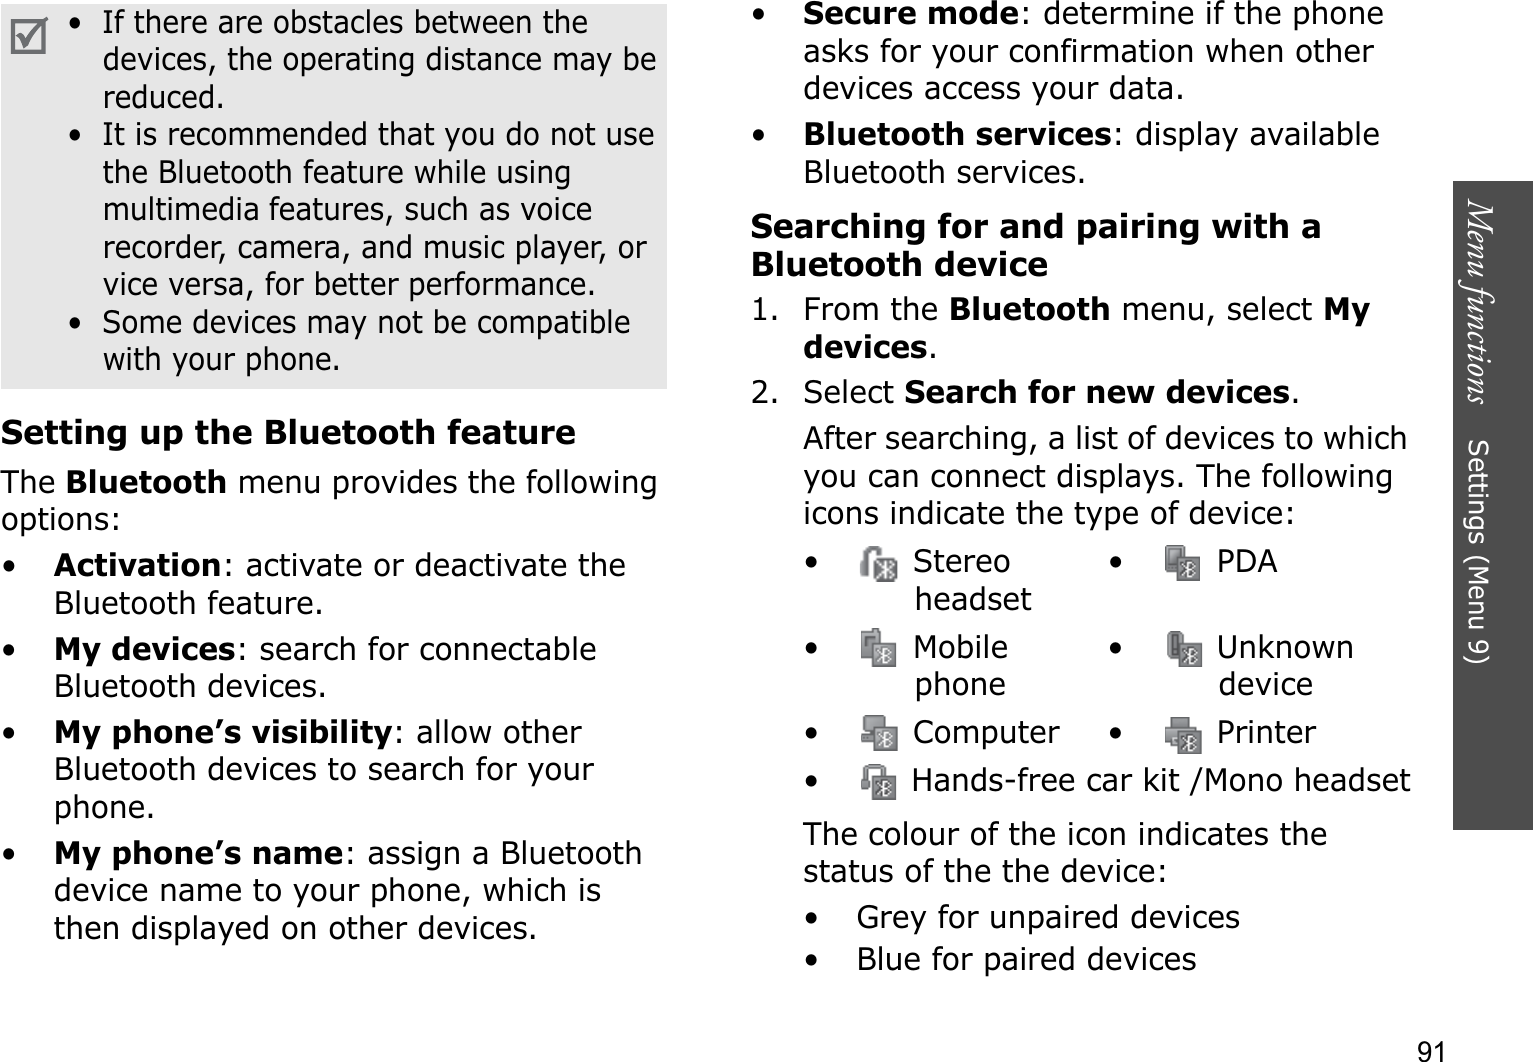 Menu functions    Settings (Menu 9)91Setting up the Bluetooth featureTheBluetooth menu provides the following options:•Activation: activate or deactivate the Bluetooth feature.•My devices: search for connectable Bluetooth devices. •My phone’s visibility: allow other Bluetooth devices to search for your phone.•My phone’s name: assign a Bluetooth device name to your phone, which is then displayed on other devices.•Secure mode: determine if the phone asks for your confirmation when other devices access your data.•Bluetooth services: display available Bluetooth services. Searching for and pairing with a Bluetooth device1. From the Bluetooth menu, select Mydevices.2. Select Search for new devices.After searching, a list of devices to which you can connect displays. The following icons indicate the type of device:The colour of the icon indicates the status of the the device:• Grey for unpaired devices• Blue for paired devices•  If there are obstacles between the devices, the operating distance may be reduced.•  It is recommended that you do not use the Bluetooth feature while using multimedia features, such as voice recorder, camera, and music player, or vice versa, for better performance.•  Some devices may not be compatible with your phone.• Stereo headset• PDA• Mobile phone•  Unknown device• Computer• Printer•  Hands-free car kit /Mono headset